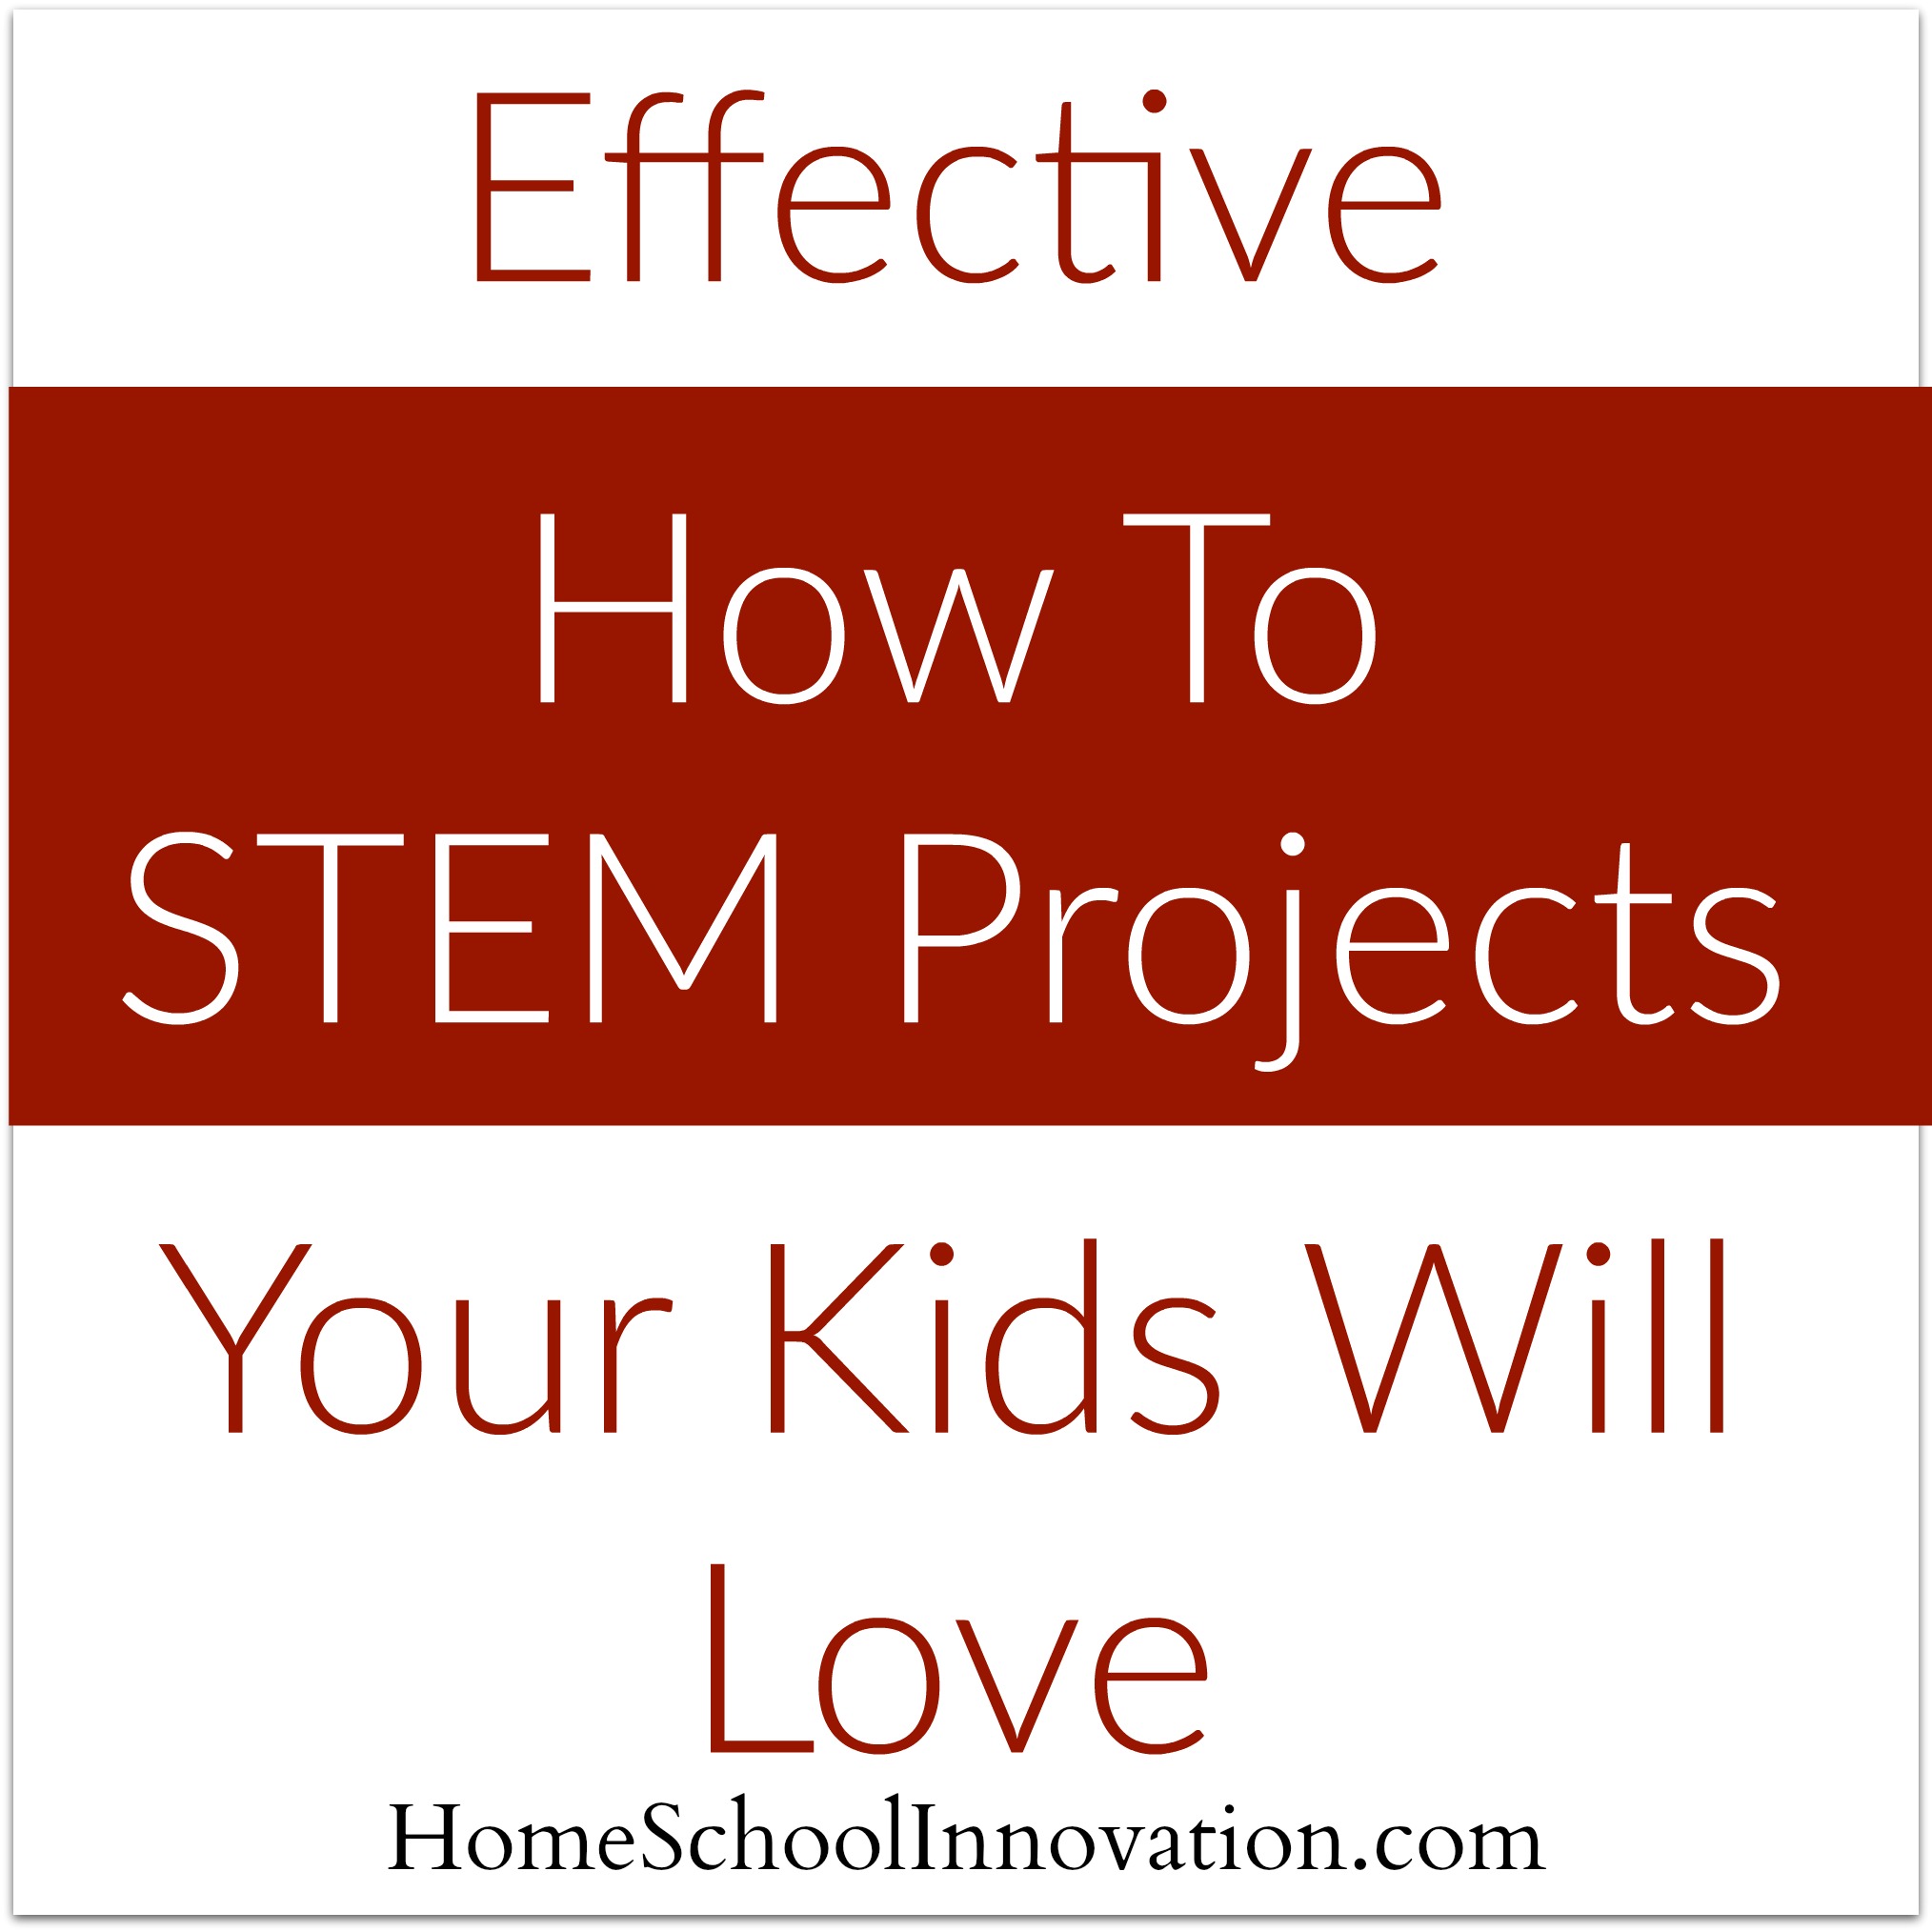 Effective How To STEM Projects Your Kids Will Love